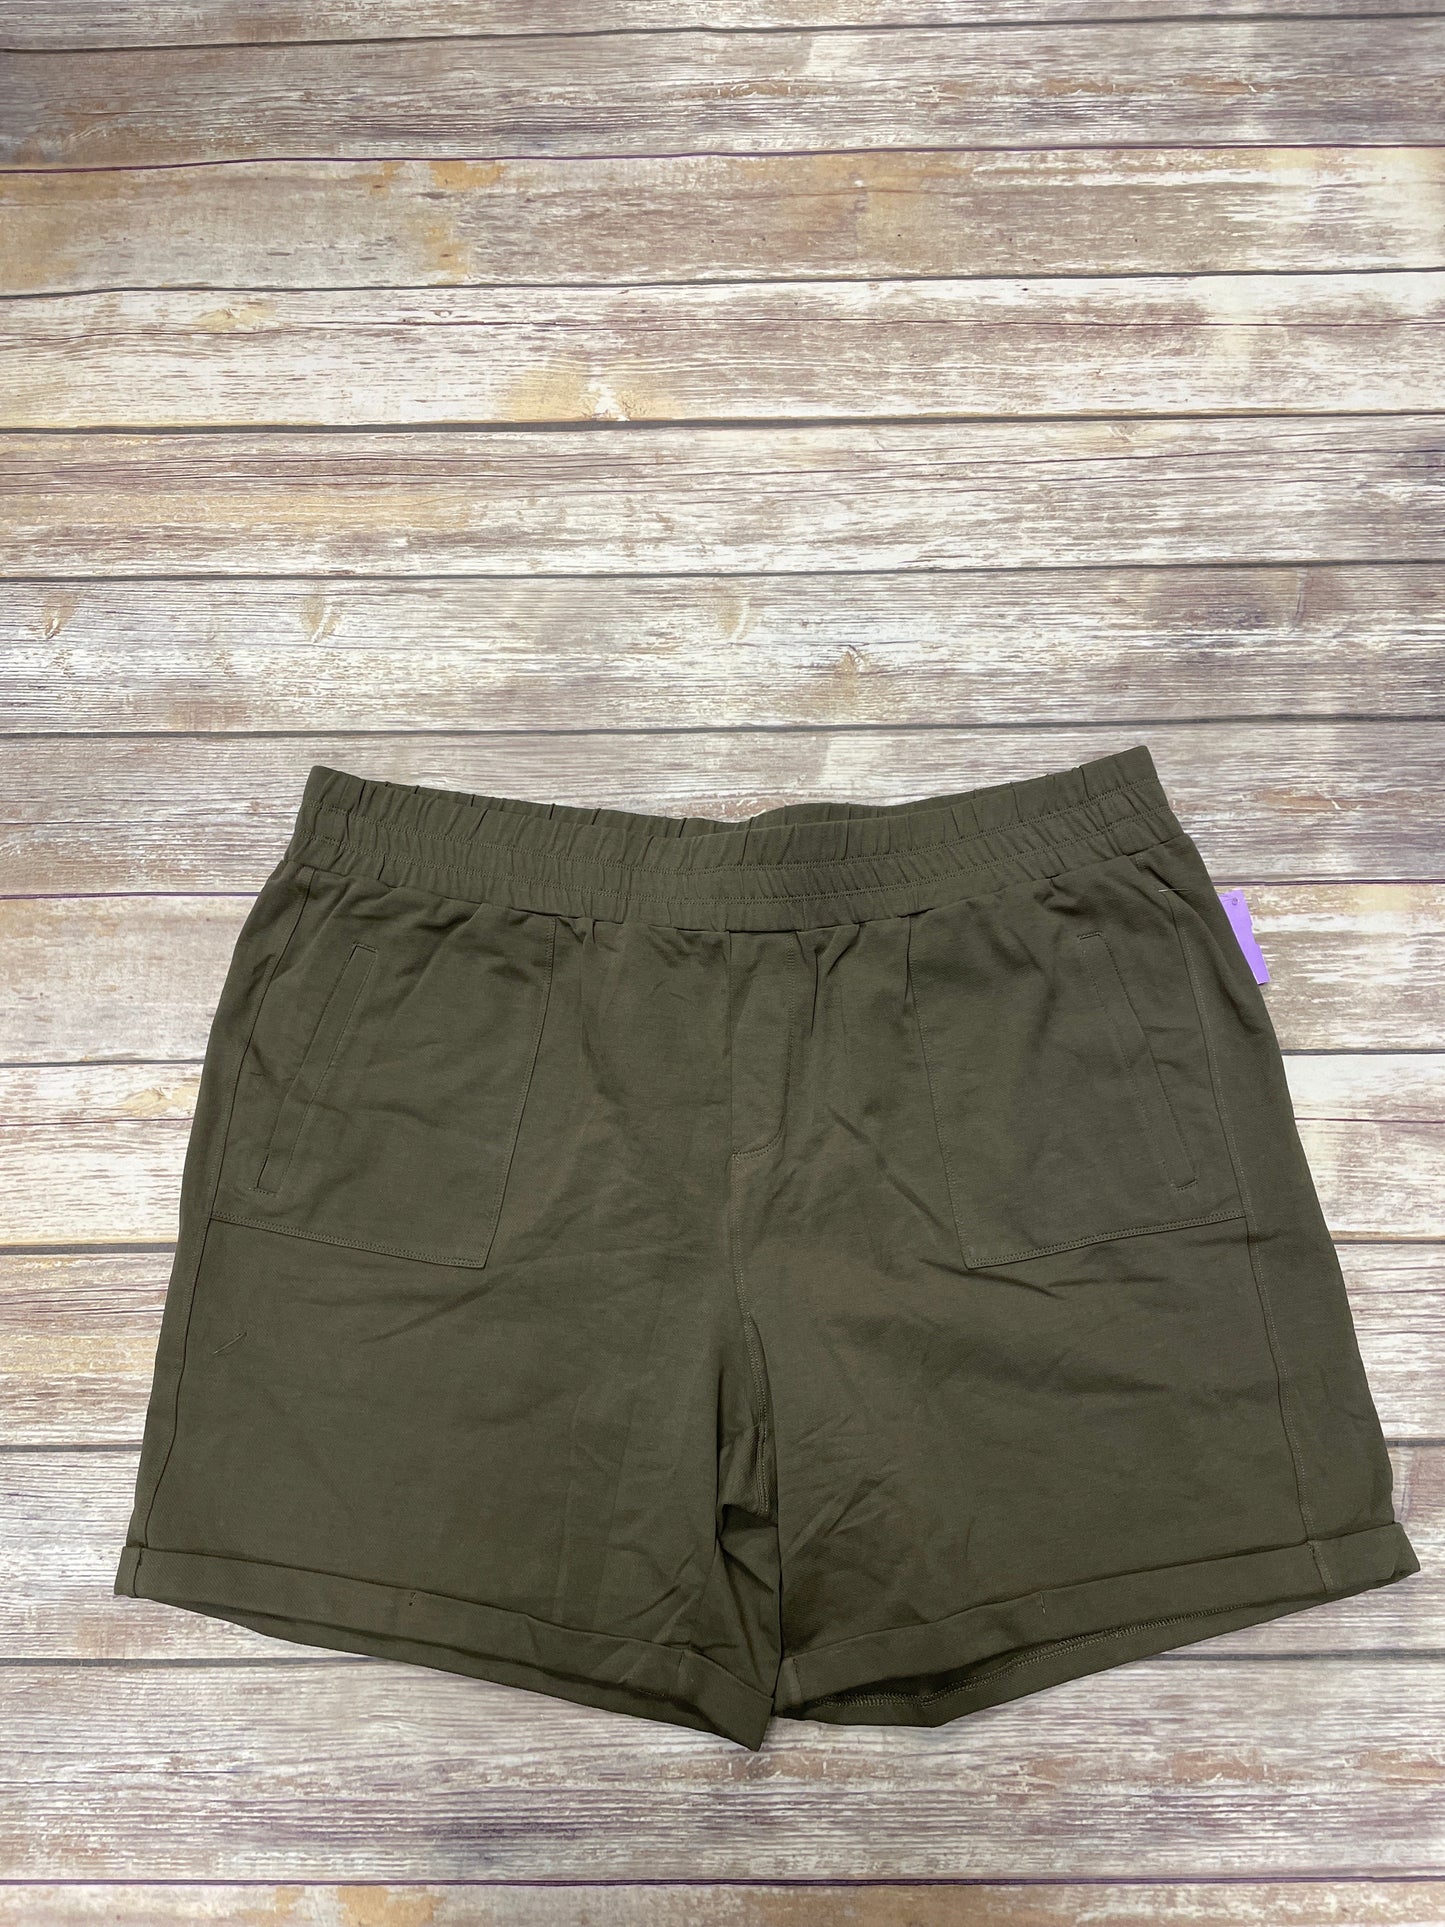 Green Athletic Shorts Cme, Size 2x